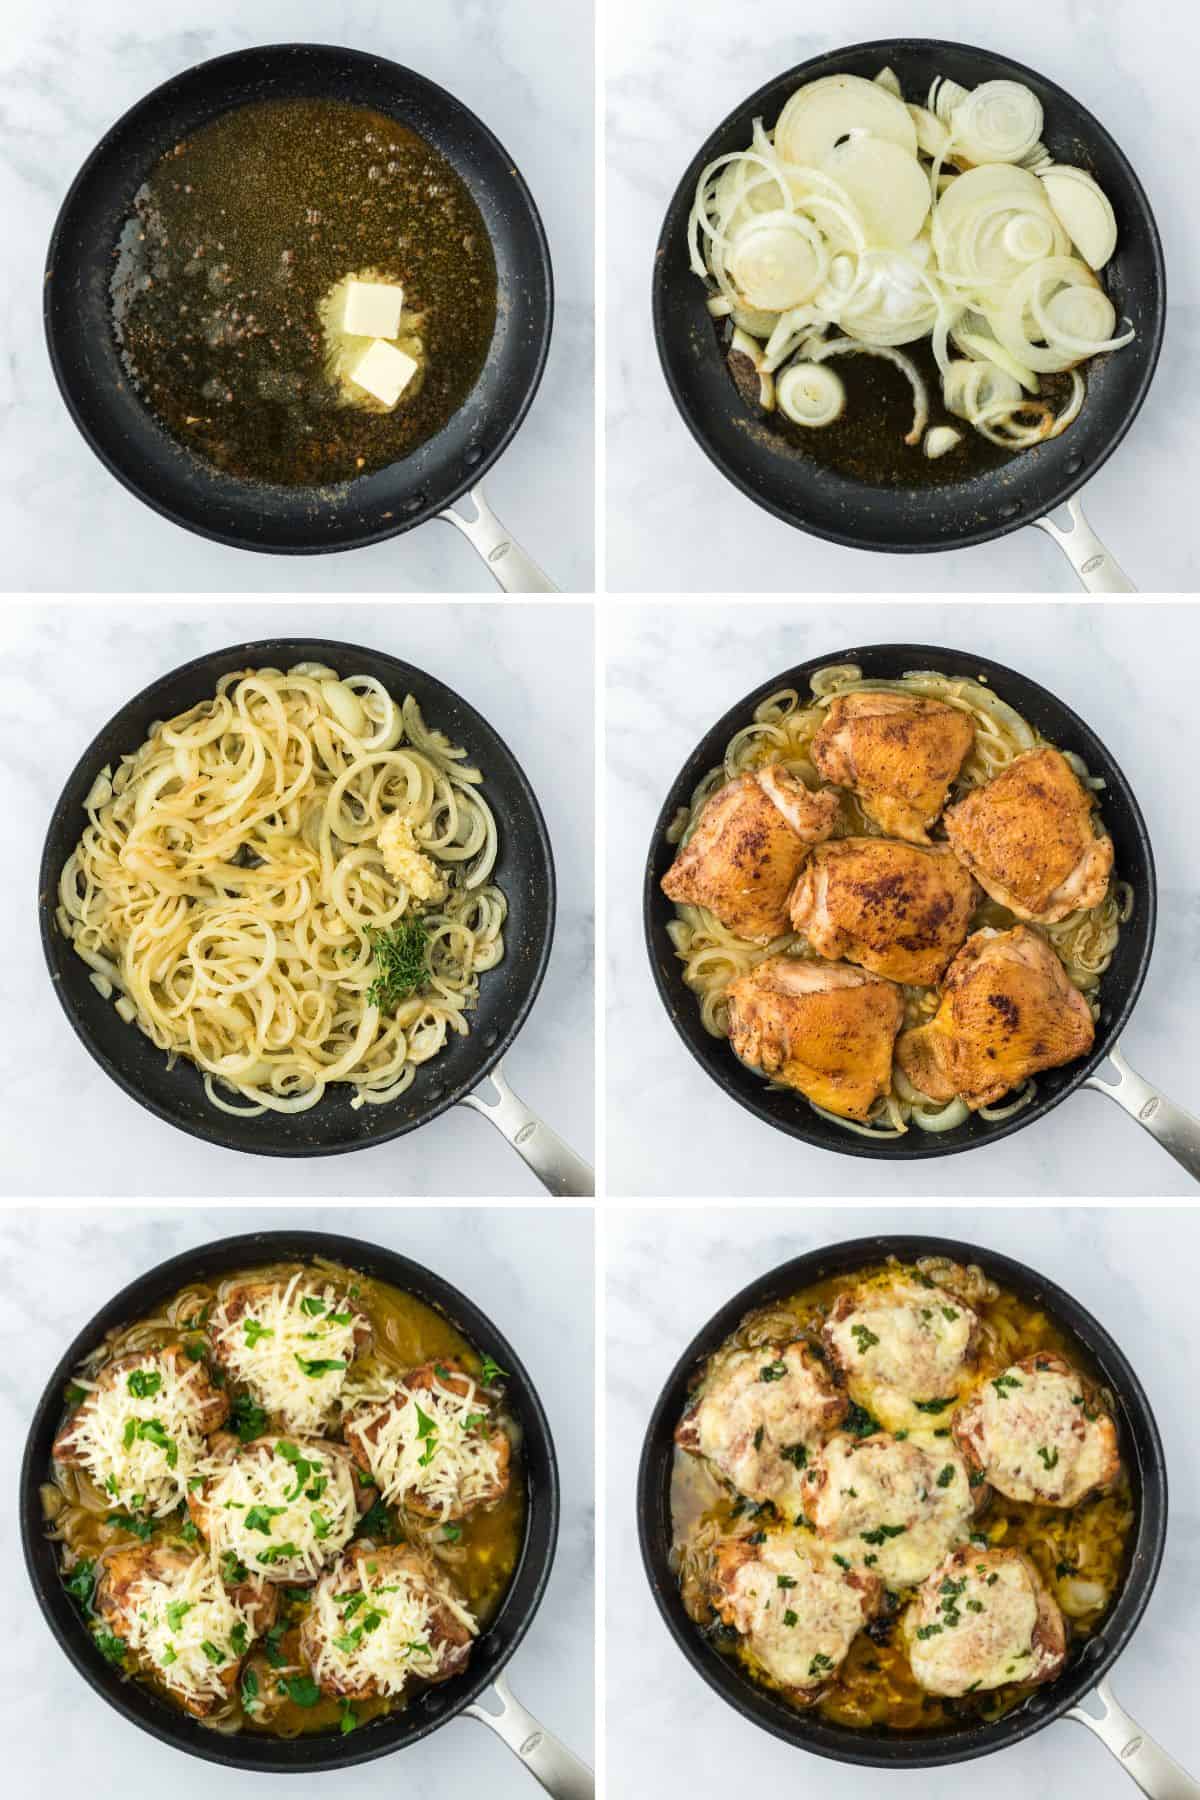 A step by step image collage on how to make french onion chicken with cooking the onions, baking the chicken, adding cheese on top, and baking the chicken again